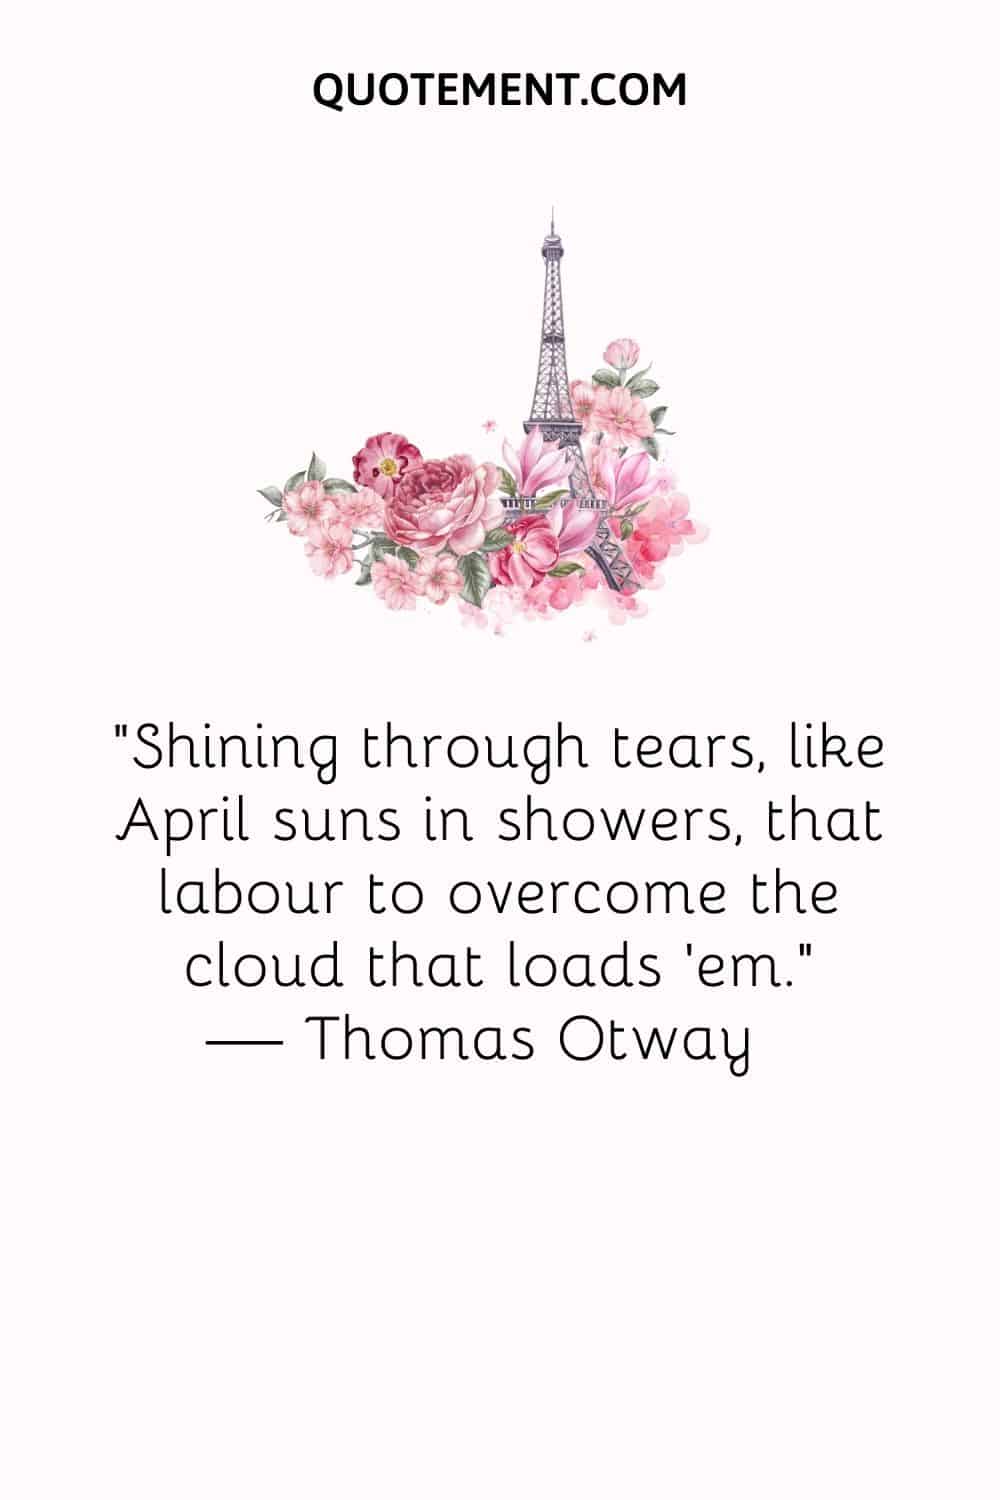 Shining through tears, like April suns in showers, that labor to overcome the cloud that loads ’em